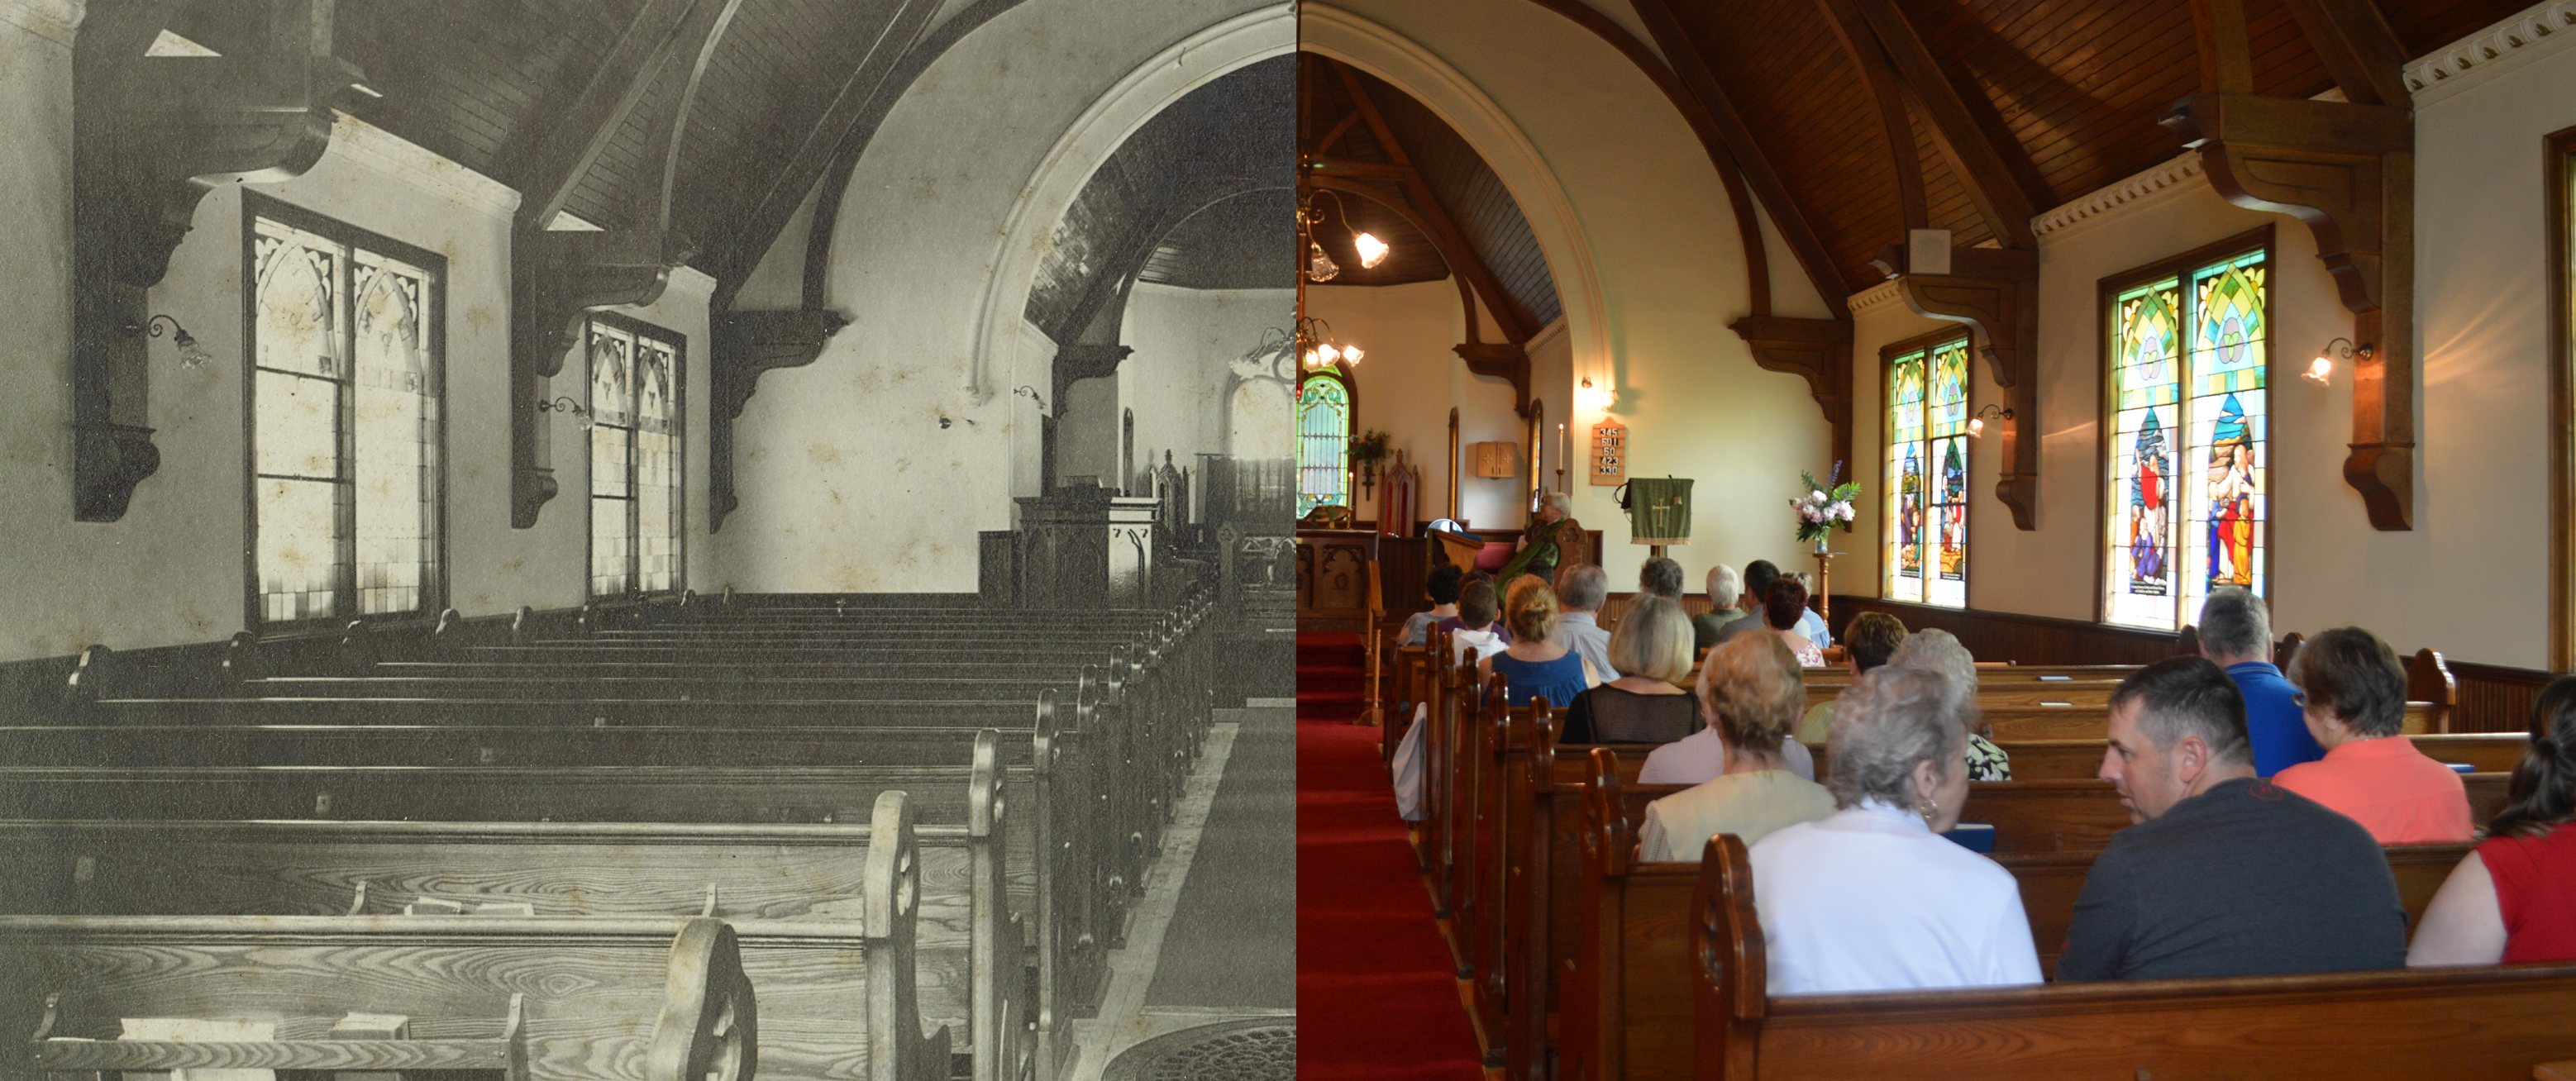 The interior of a church the left half of the image is black and white, the right half is contemporary and features people sitting in the pews